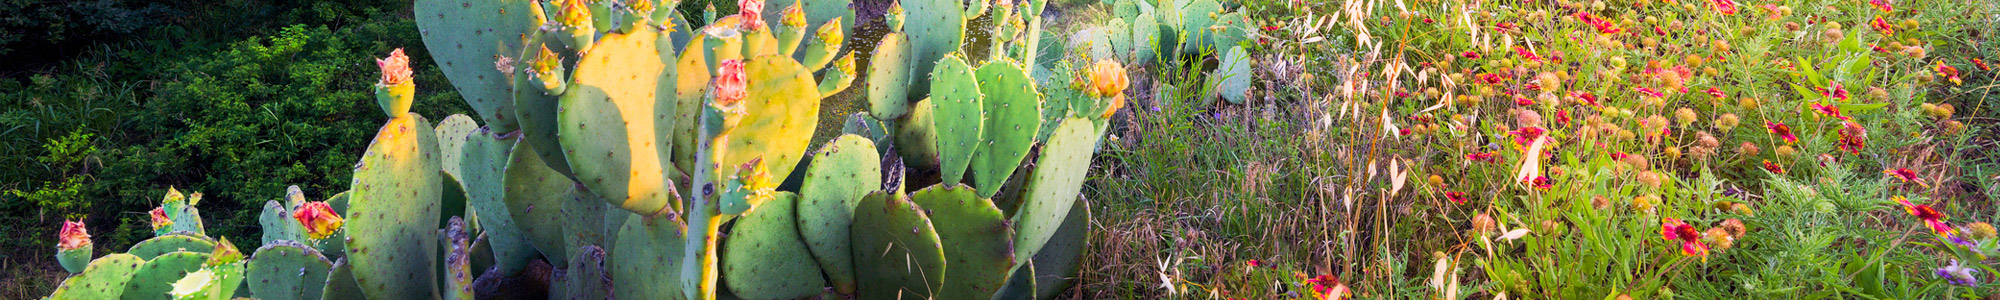 sun setting over wildflowers and cacti in Texas